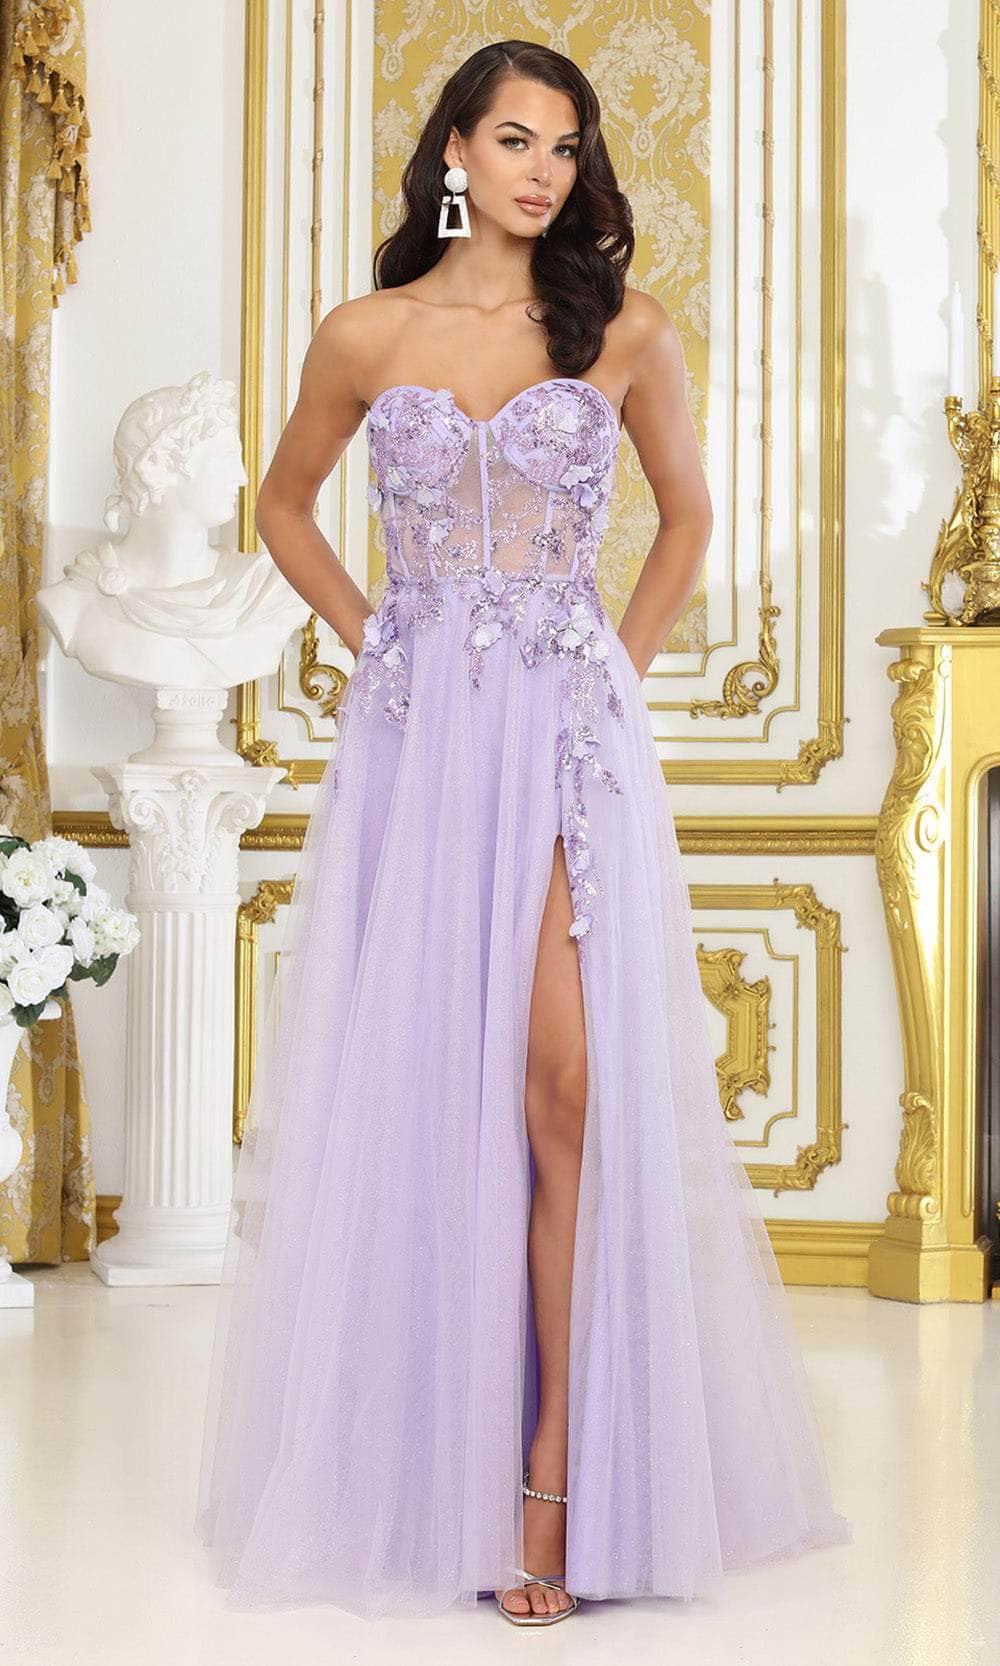 May Queen MQ2059 - Strapless Bustier Evening Dress Prom Dresses